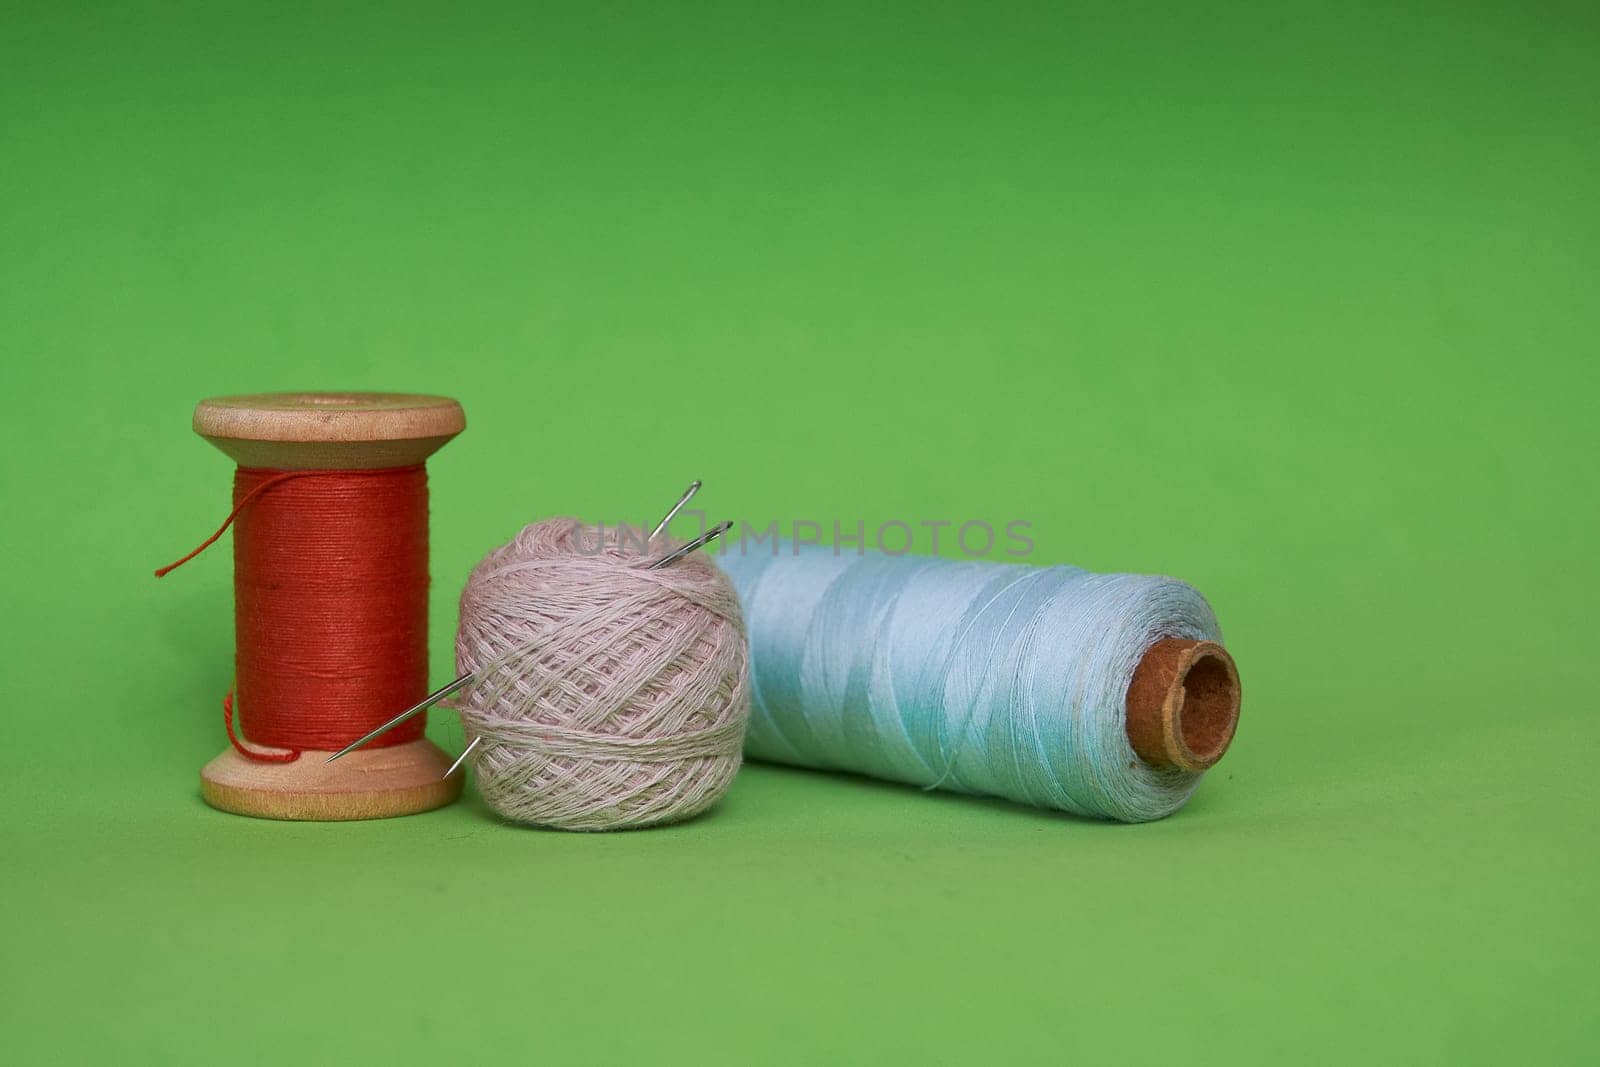 multicolored spools of thread and a sewing needle on a green background by Севостьянов